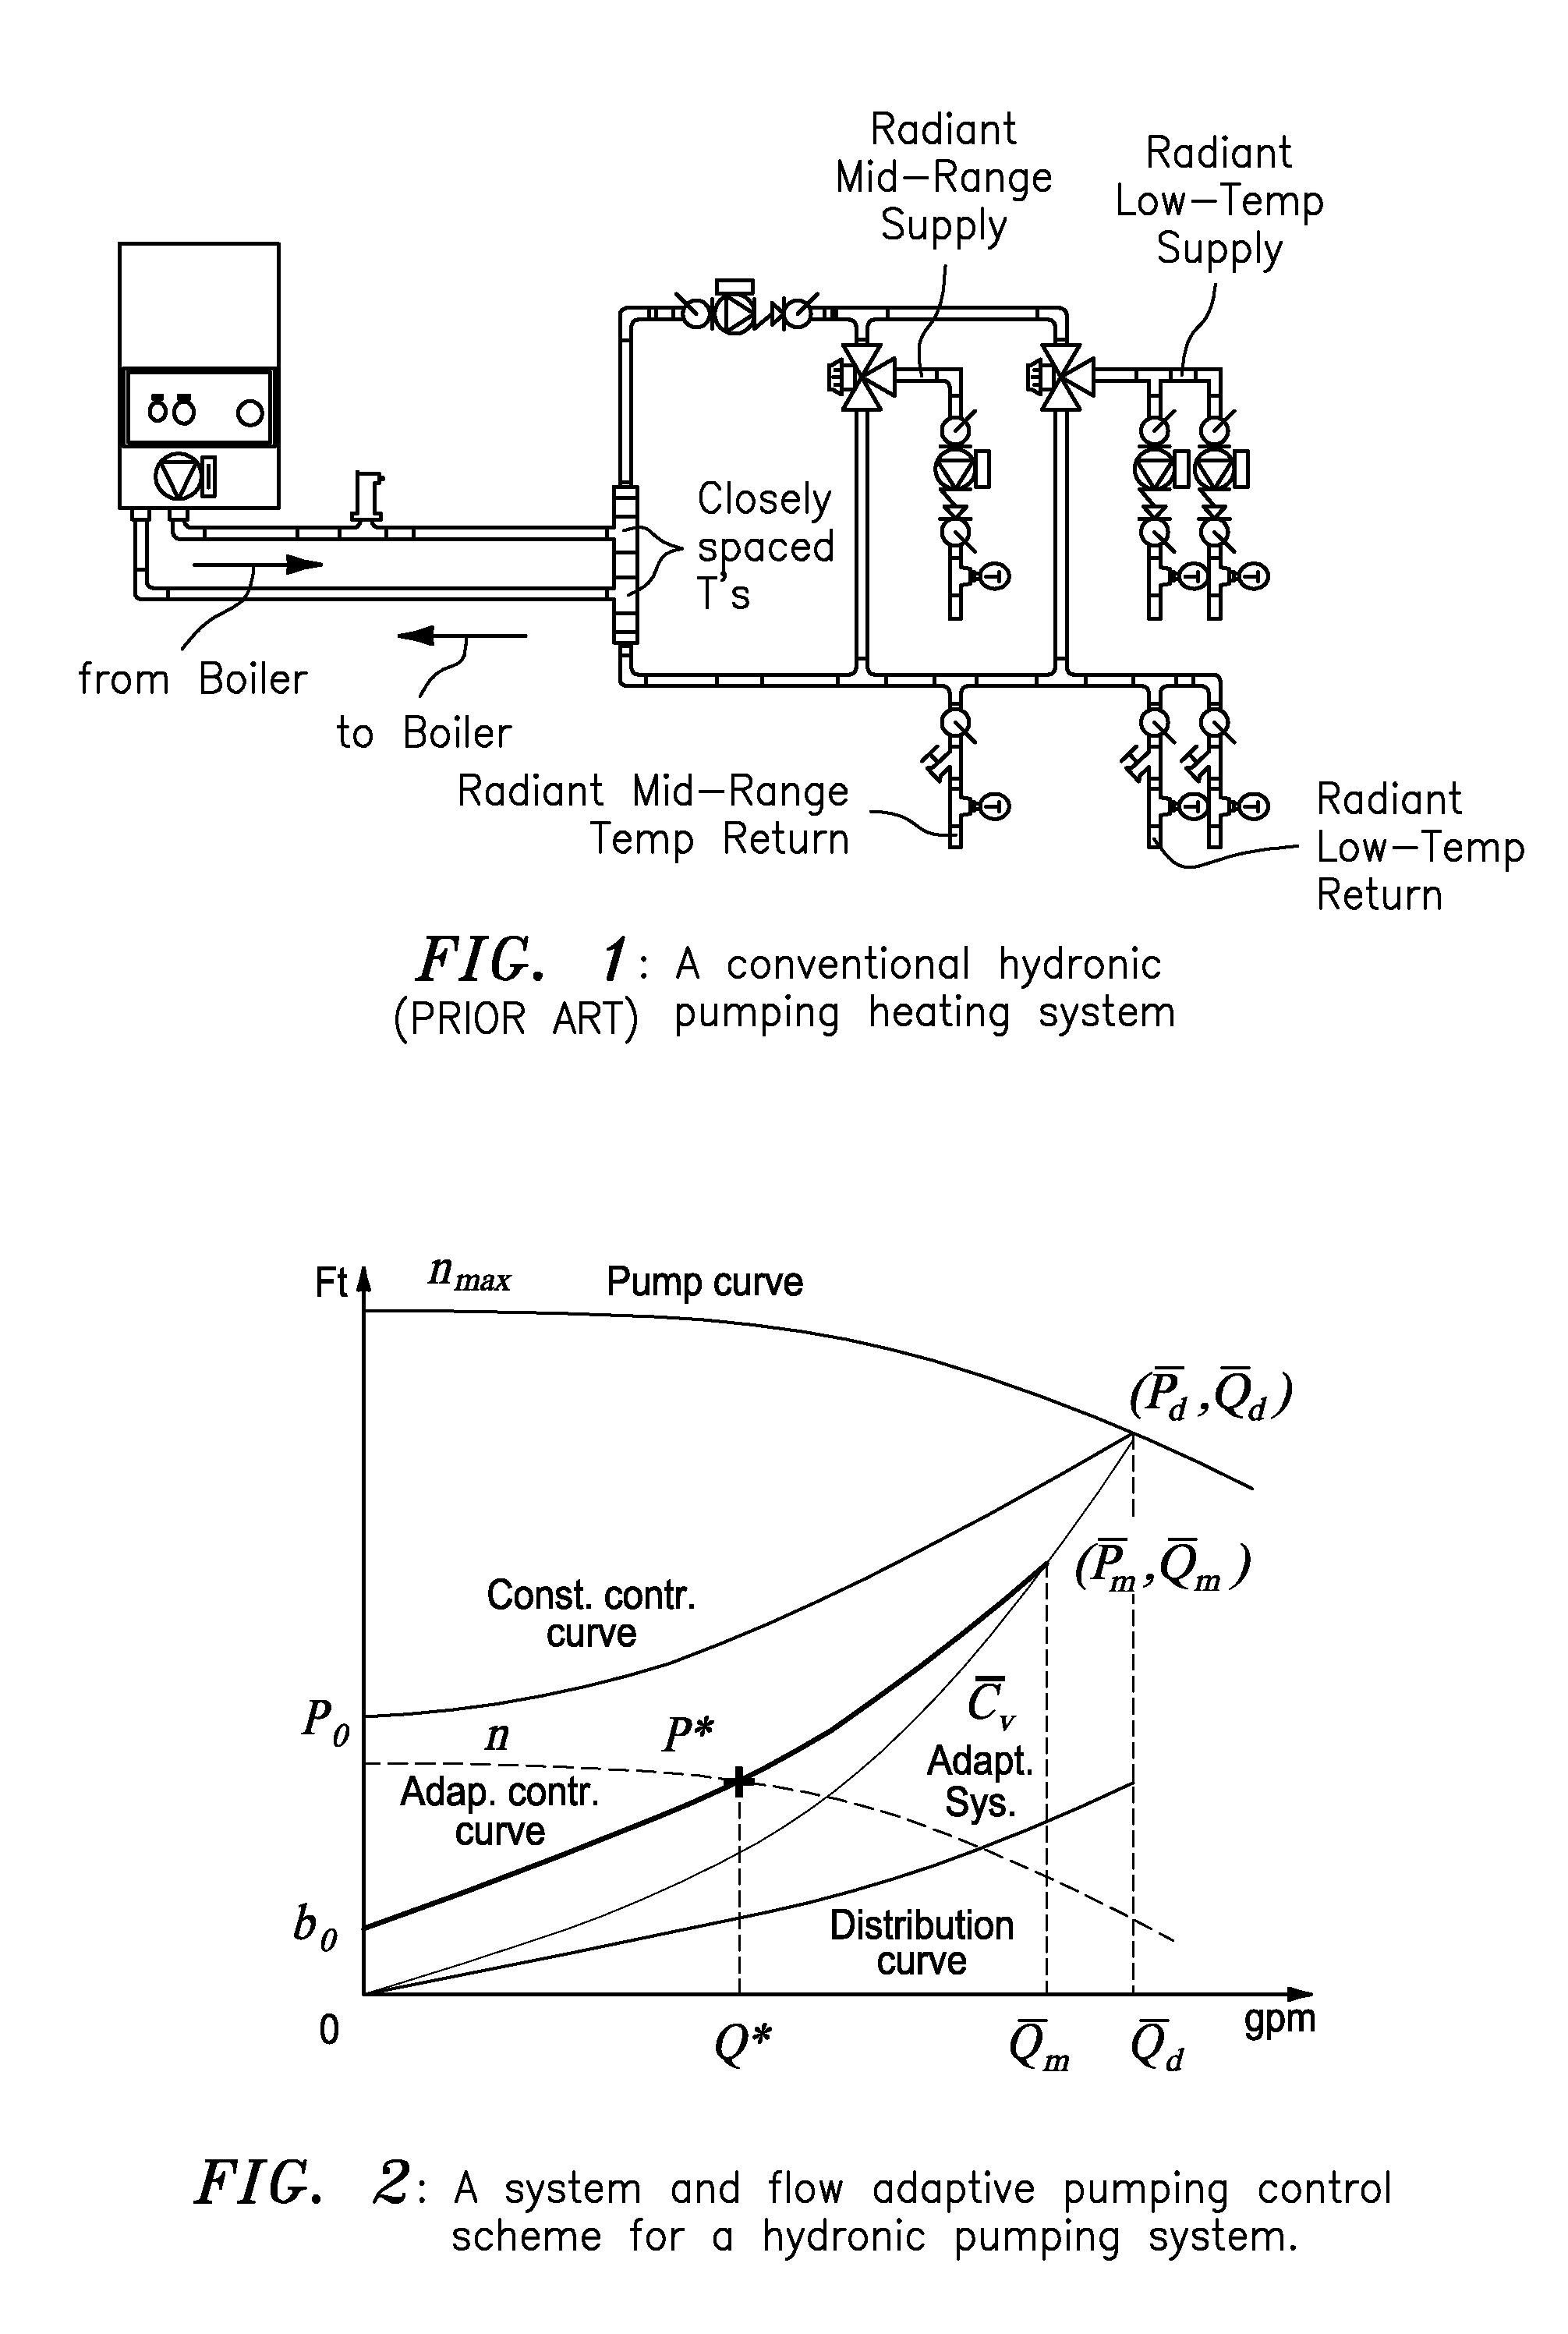 System and flow adaptive sensorless pumping control apparatus for energy saving pumping applications